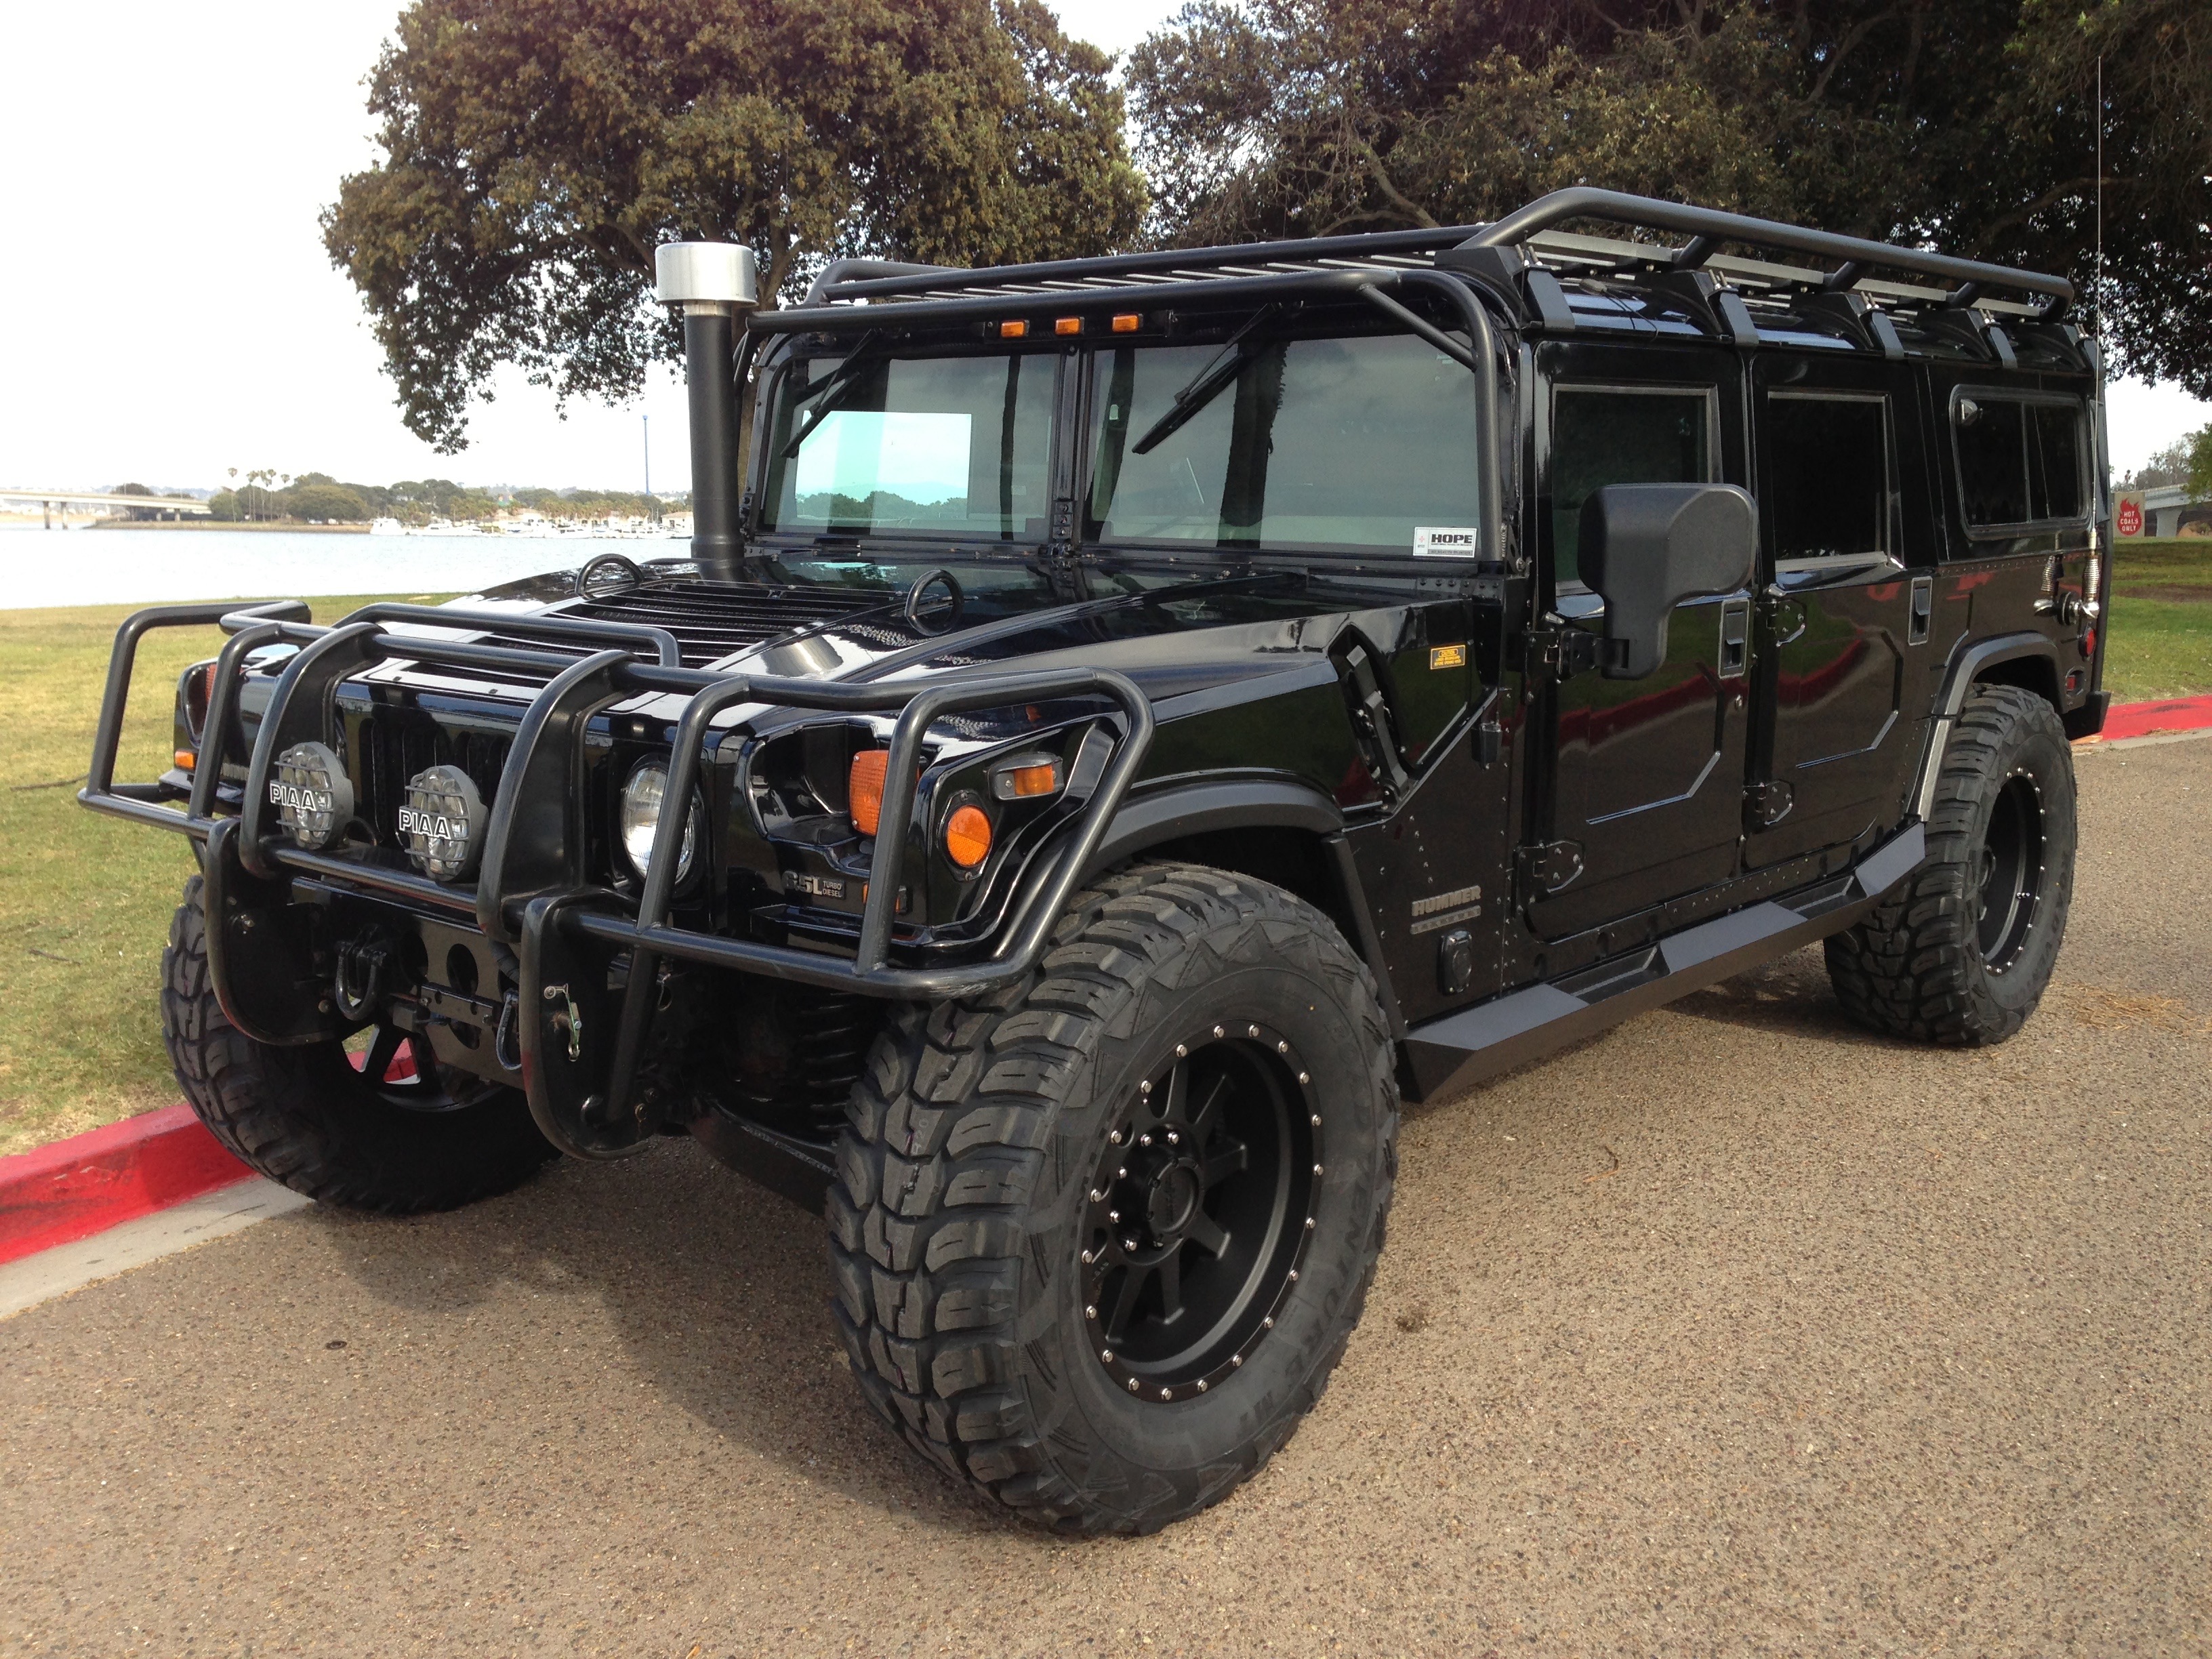 sold—-2000 hummer h1 “Search and Rescue edition” 35k miles